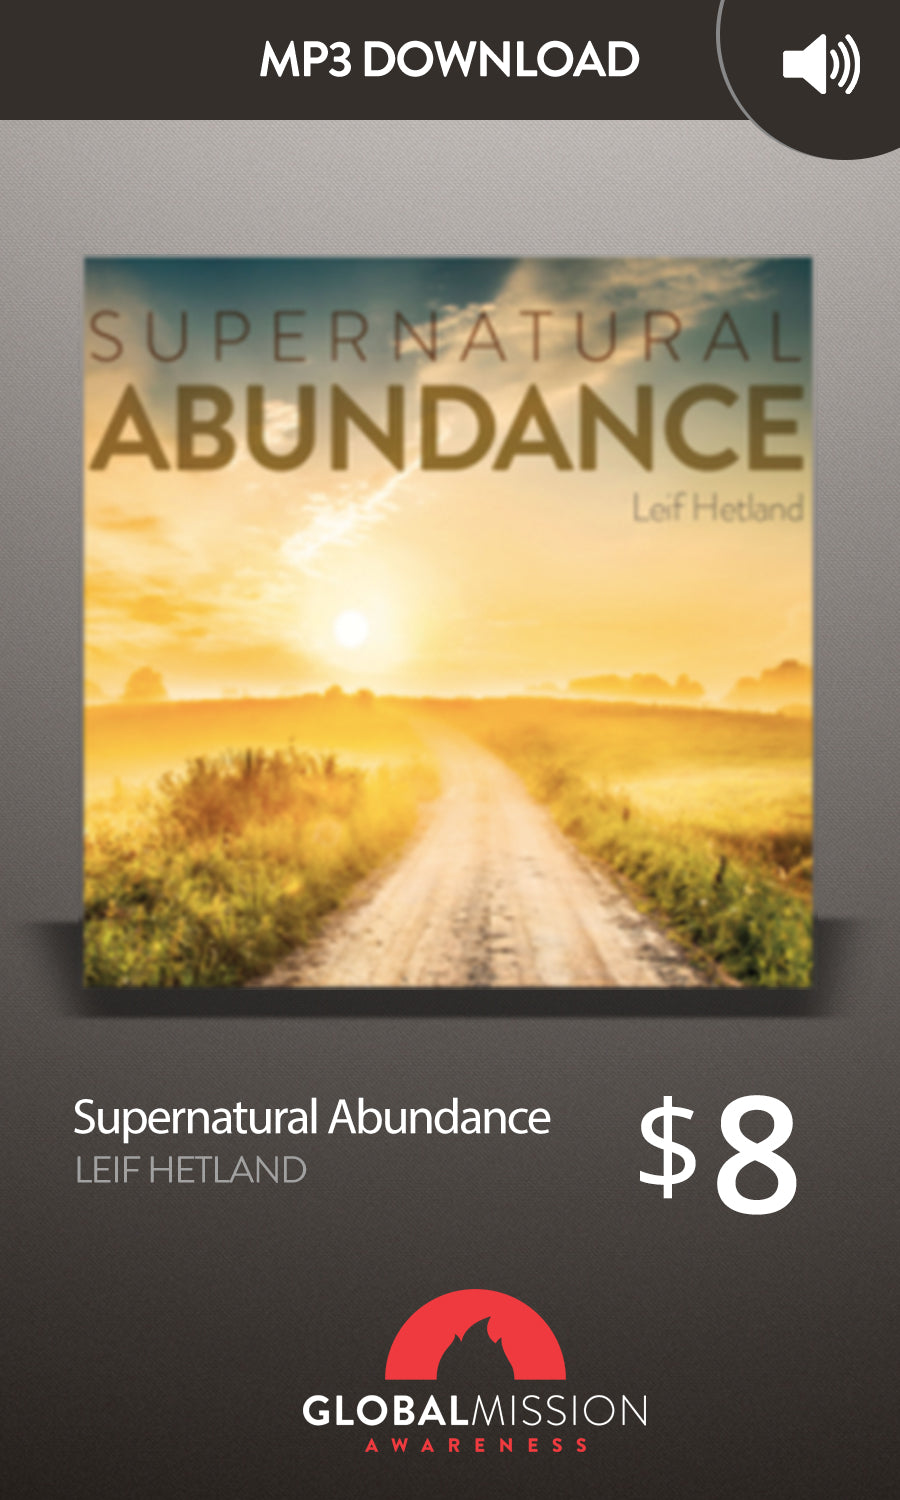 Supernatural Abundance: A Journey to the Father's House